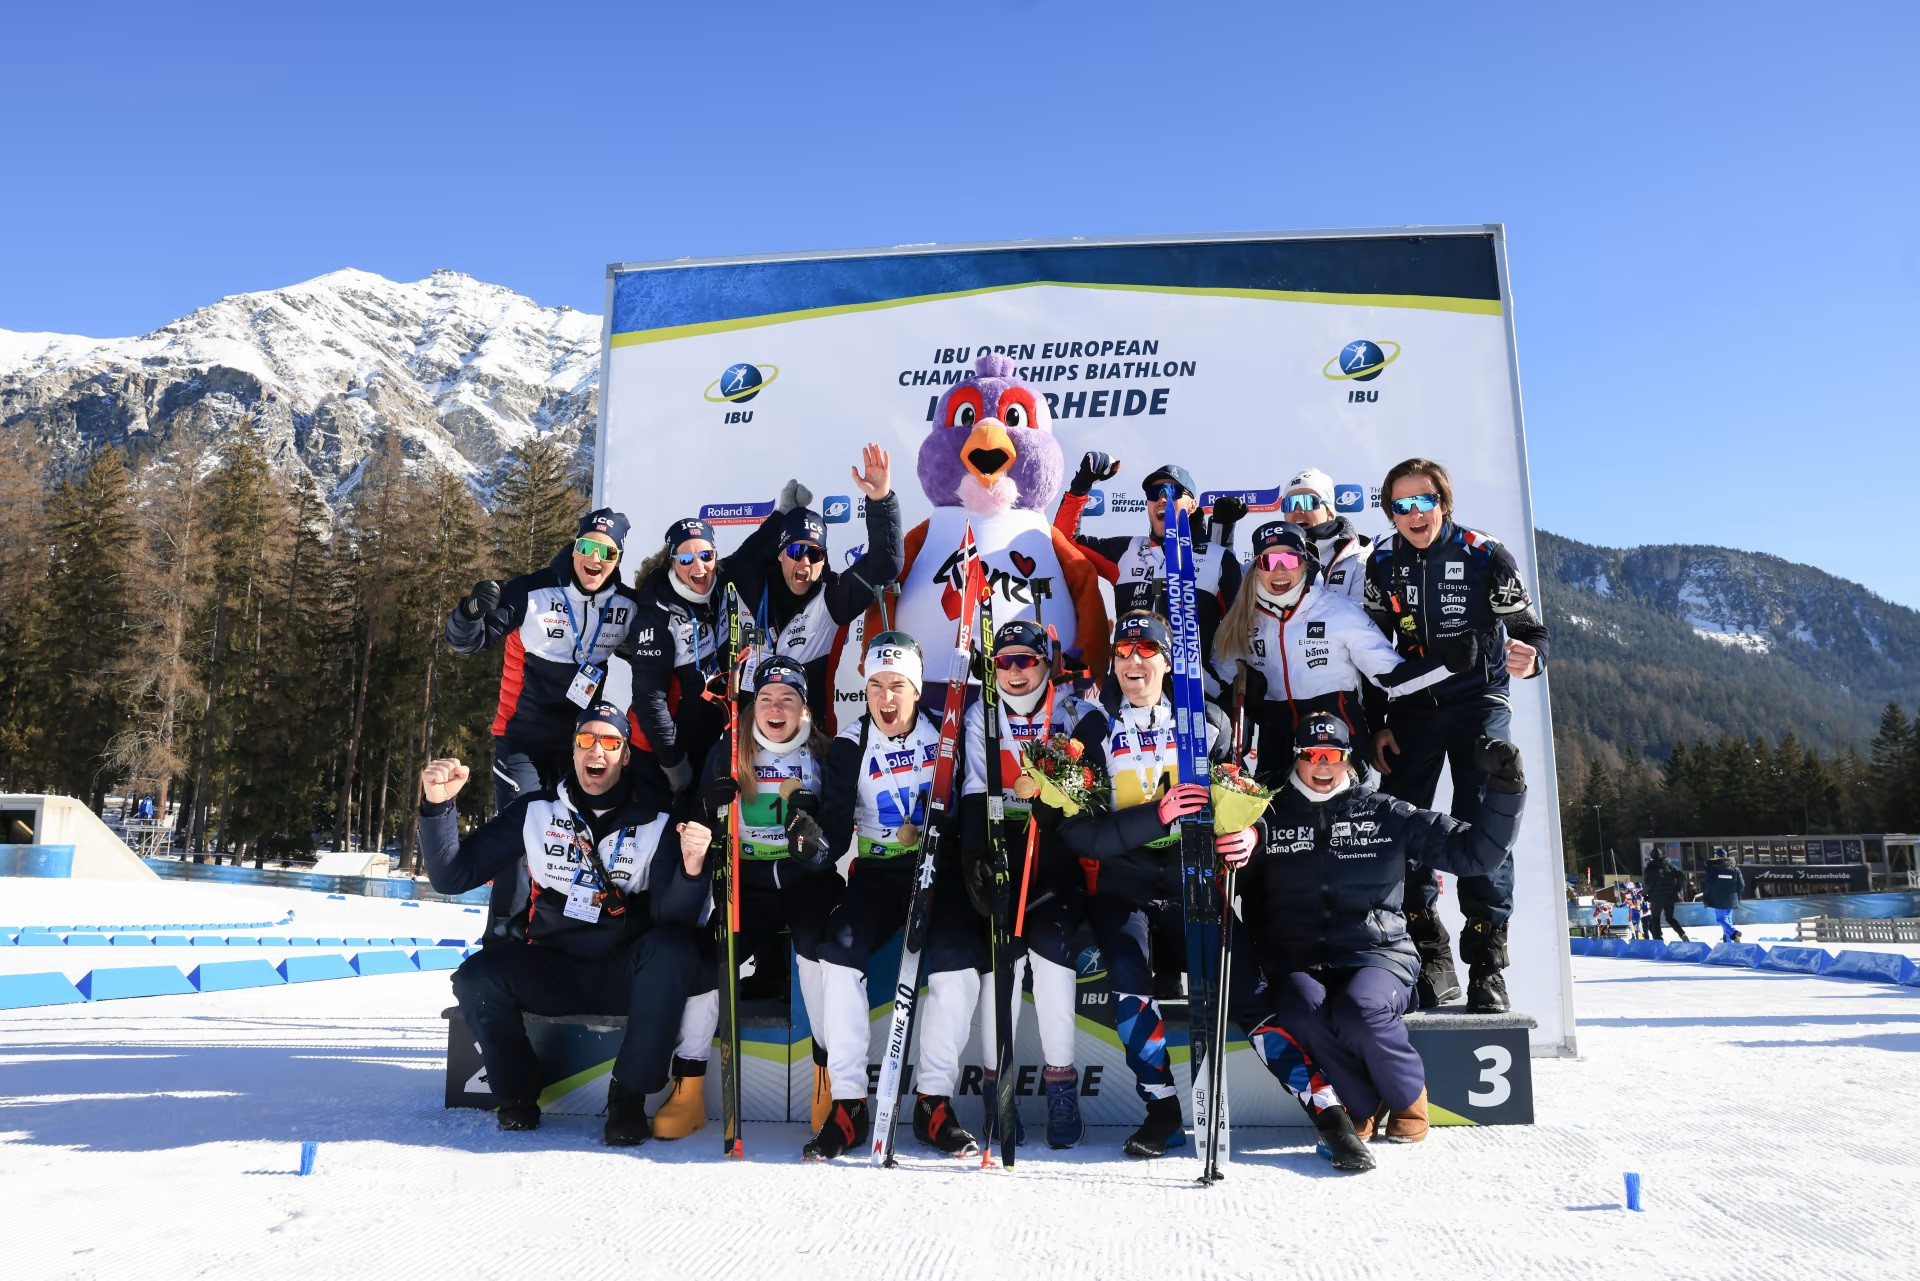 Norway claimed five golds in a eight-medal haul at the IBU Open European Championships ©IBU